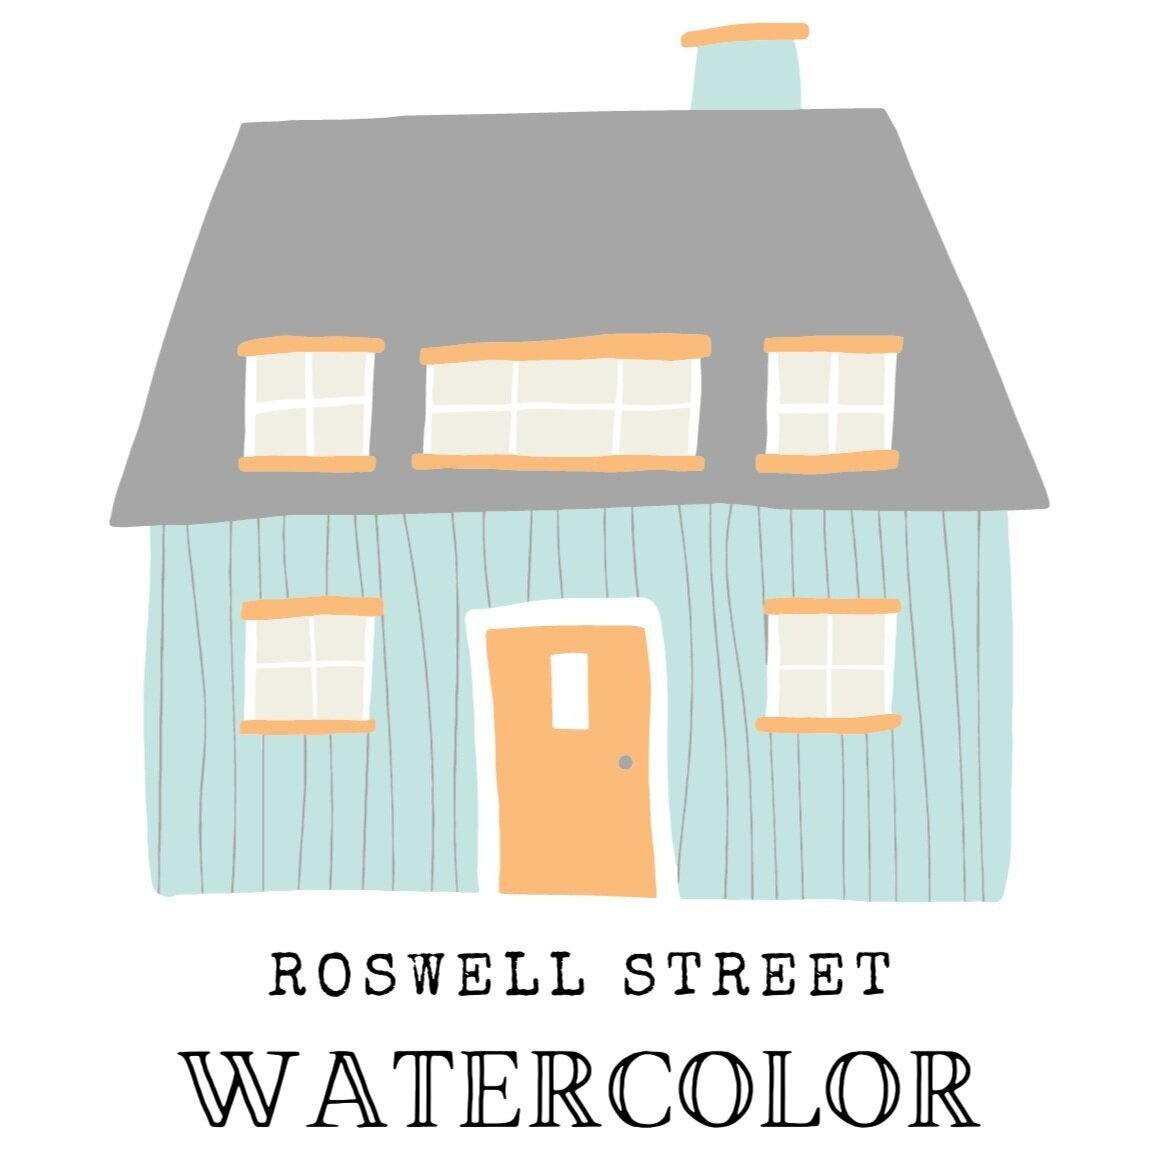 Roswell Street Watercolor